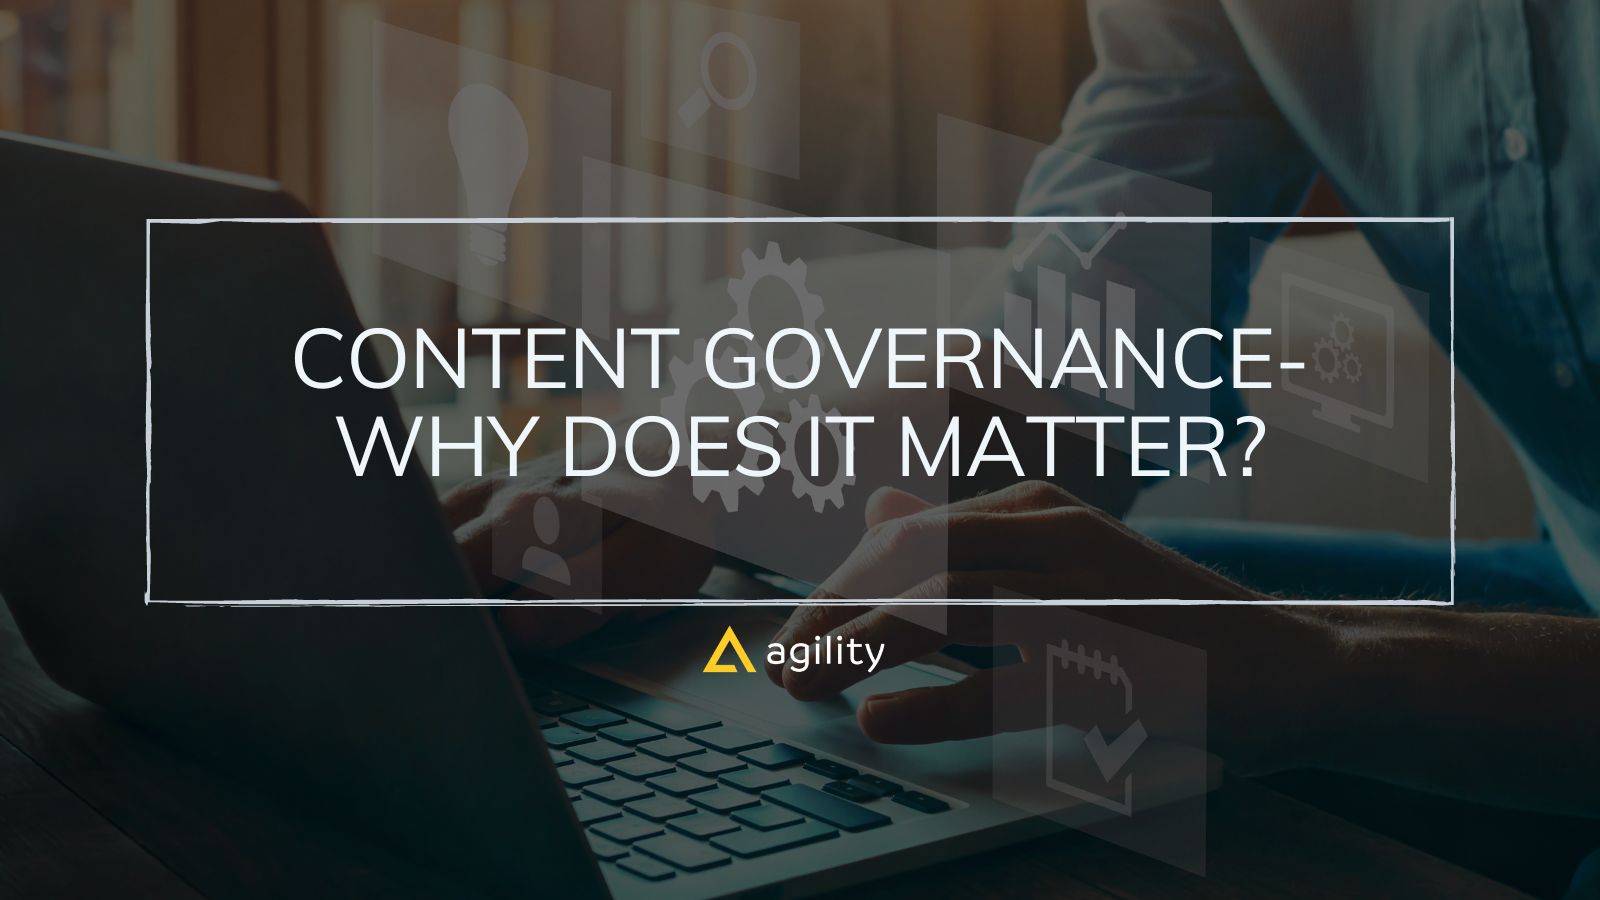 Content governance- why does it matter?